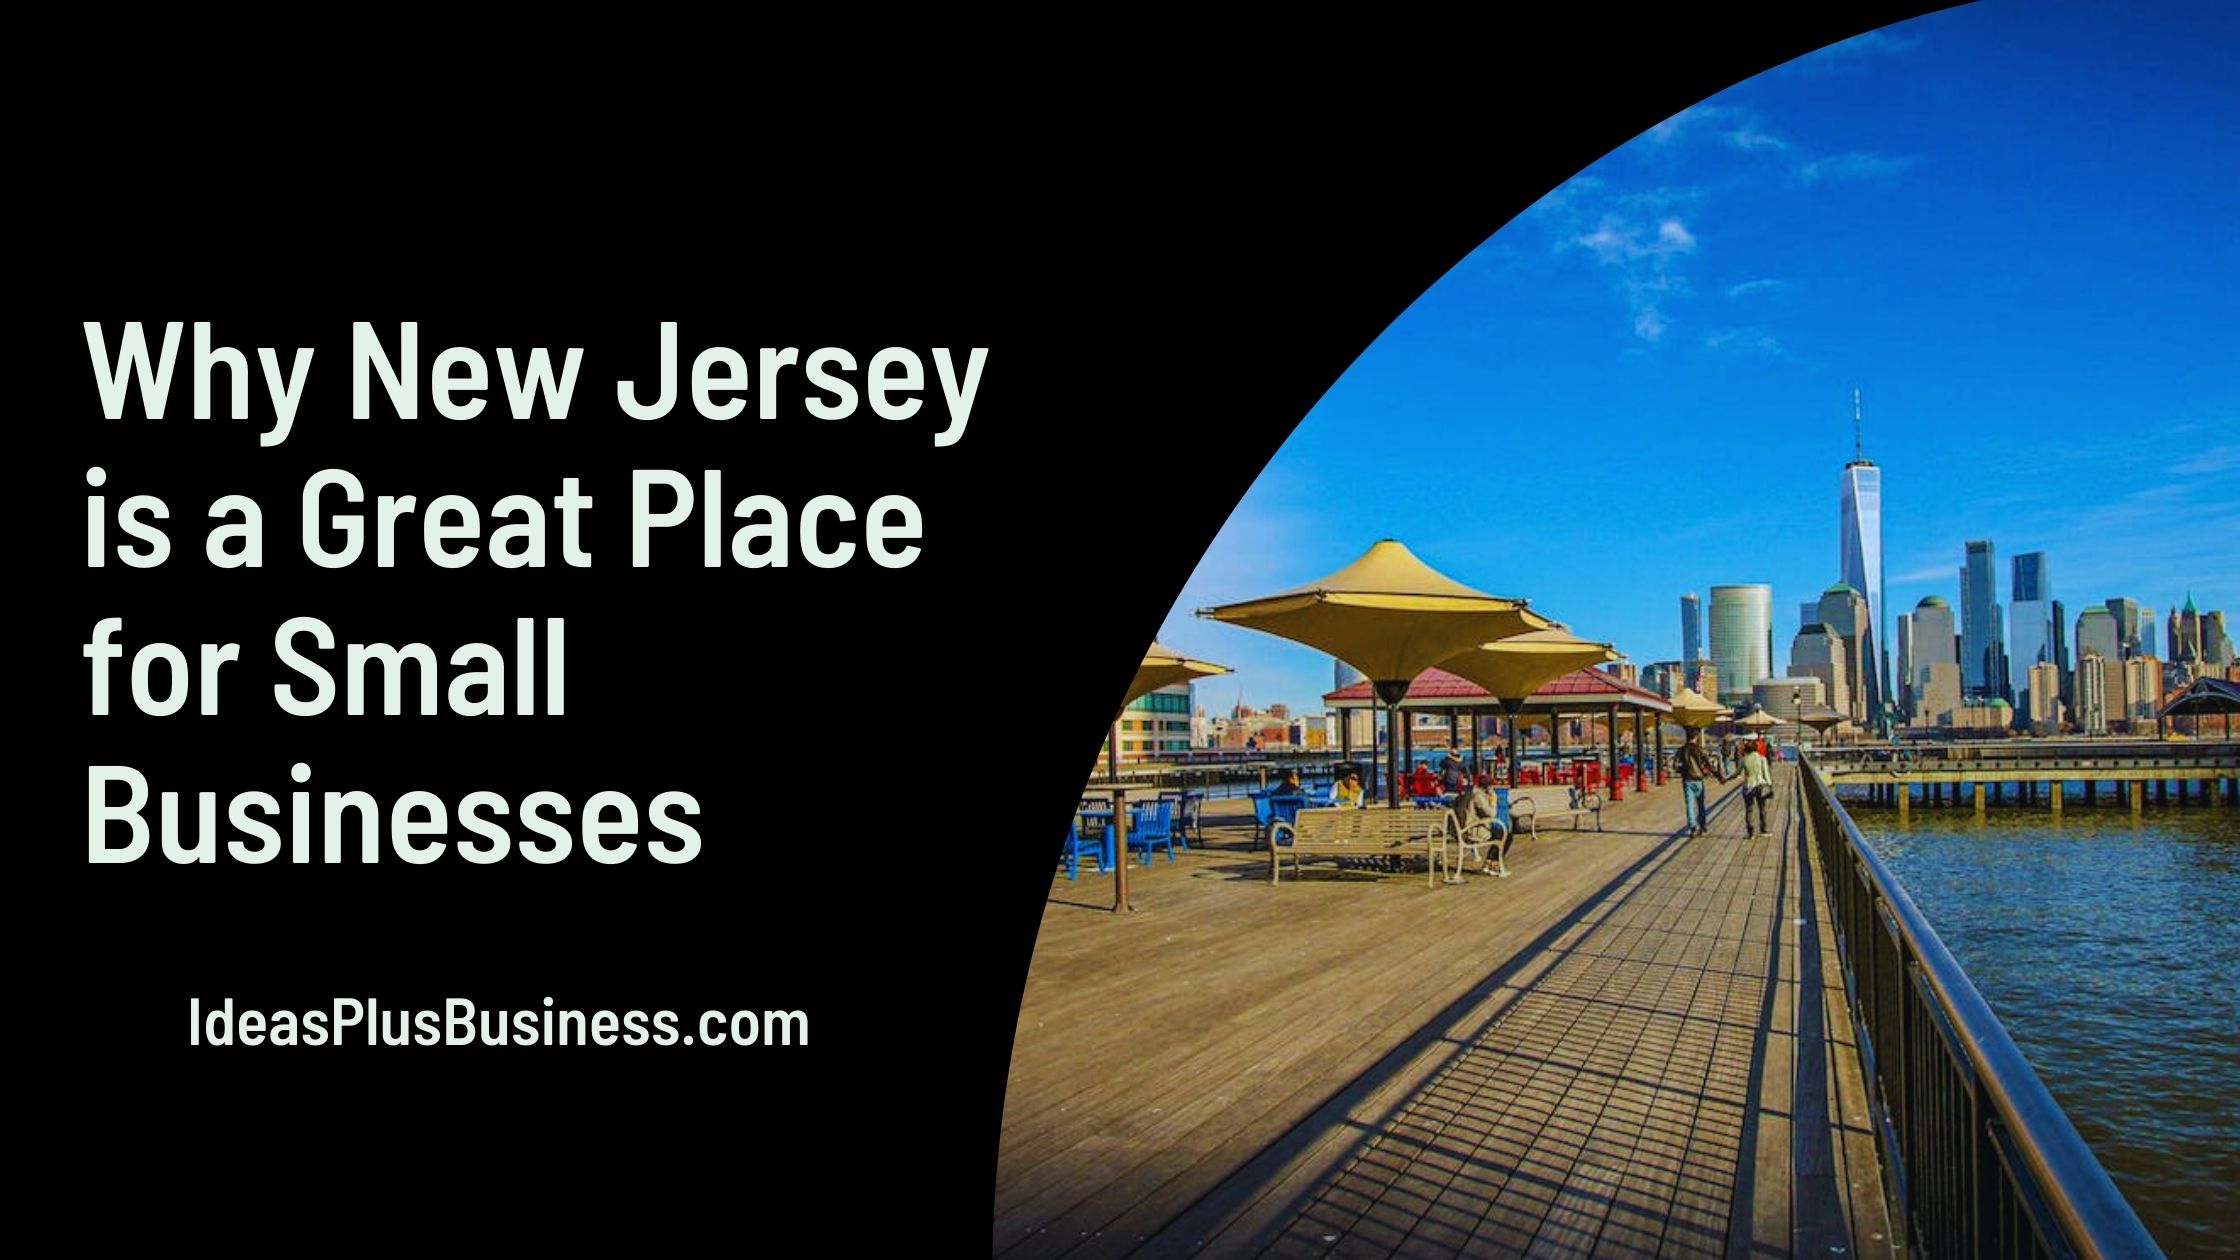 6 Reasons Why New Jersey is a Great Place for Small Businesses